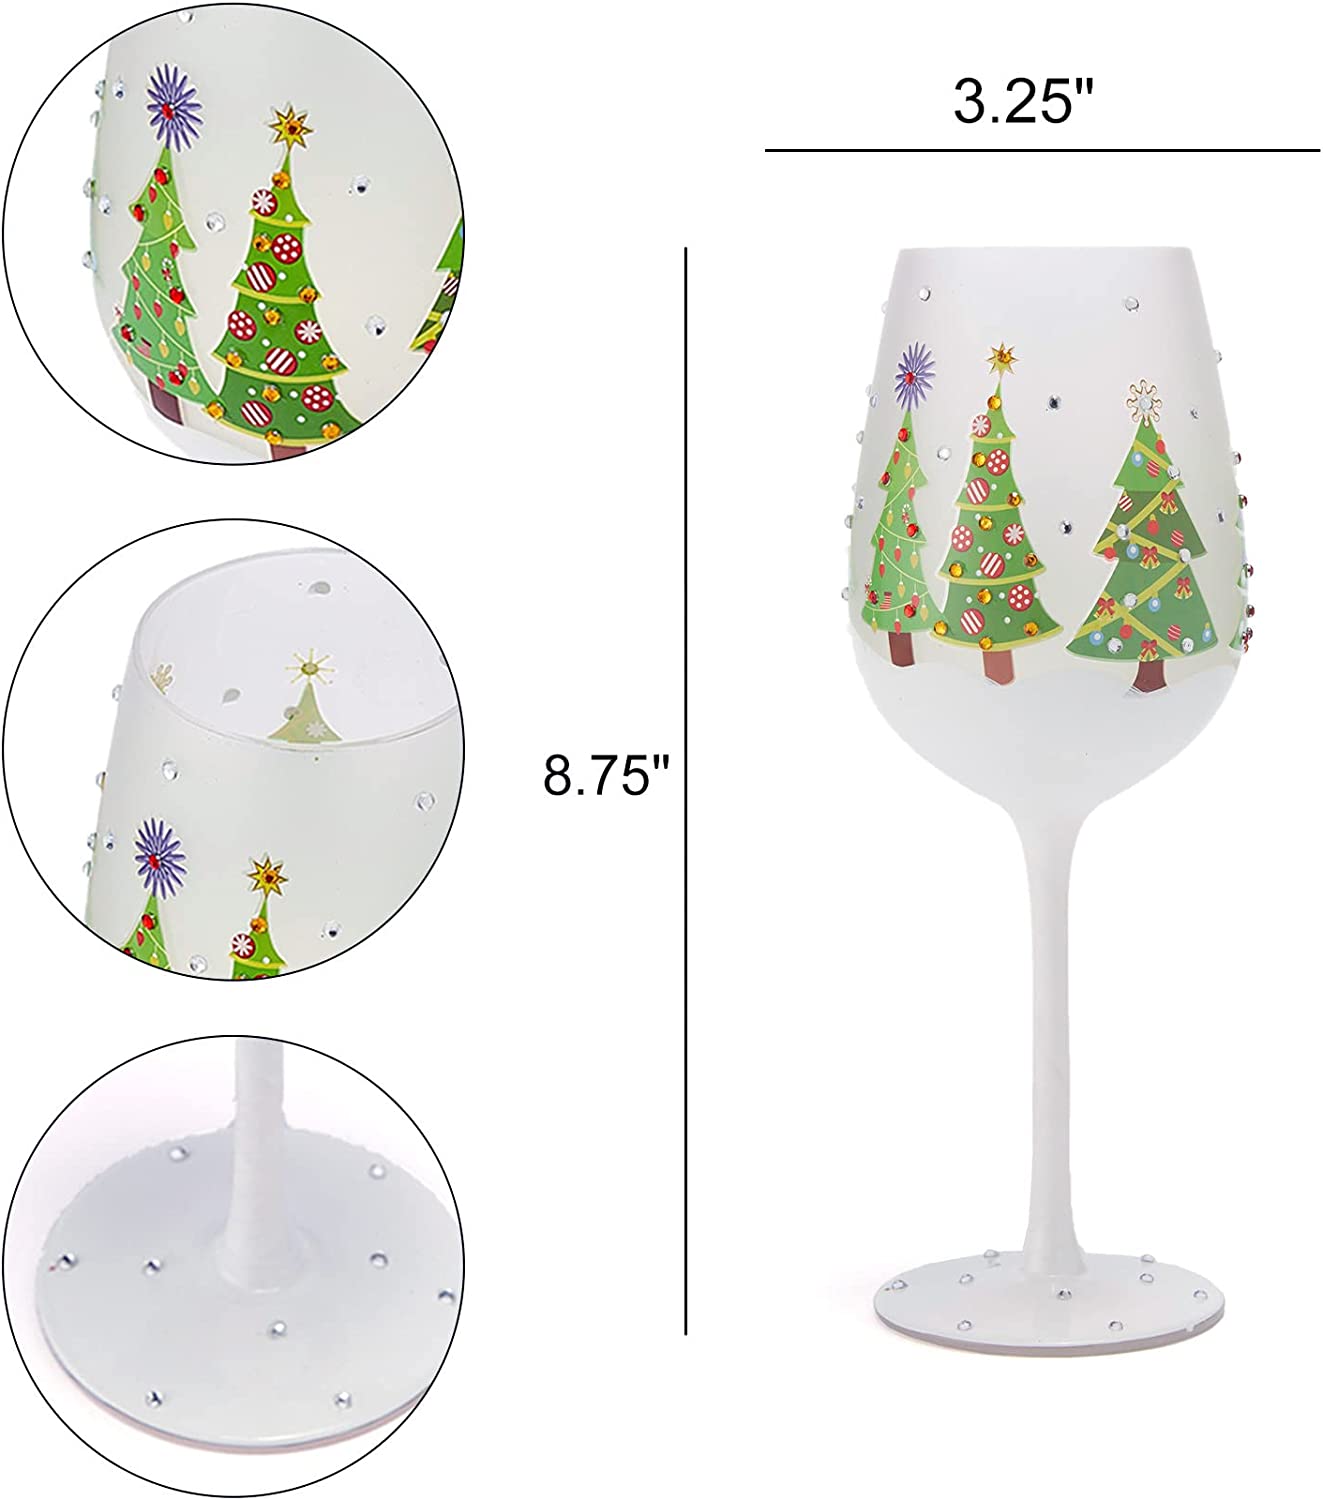 Set of 2 Stemmed Christmas Tree Design Wine Glasses - Hand Painted 14 oz Decorated Christmas Tree Glasses - Perfect for Wine, Champagne, Holiday Parties and Festivities - 8.75" High, 14 oz Capacity-4